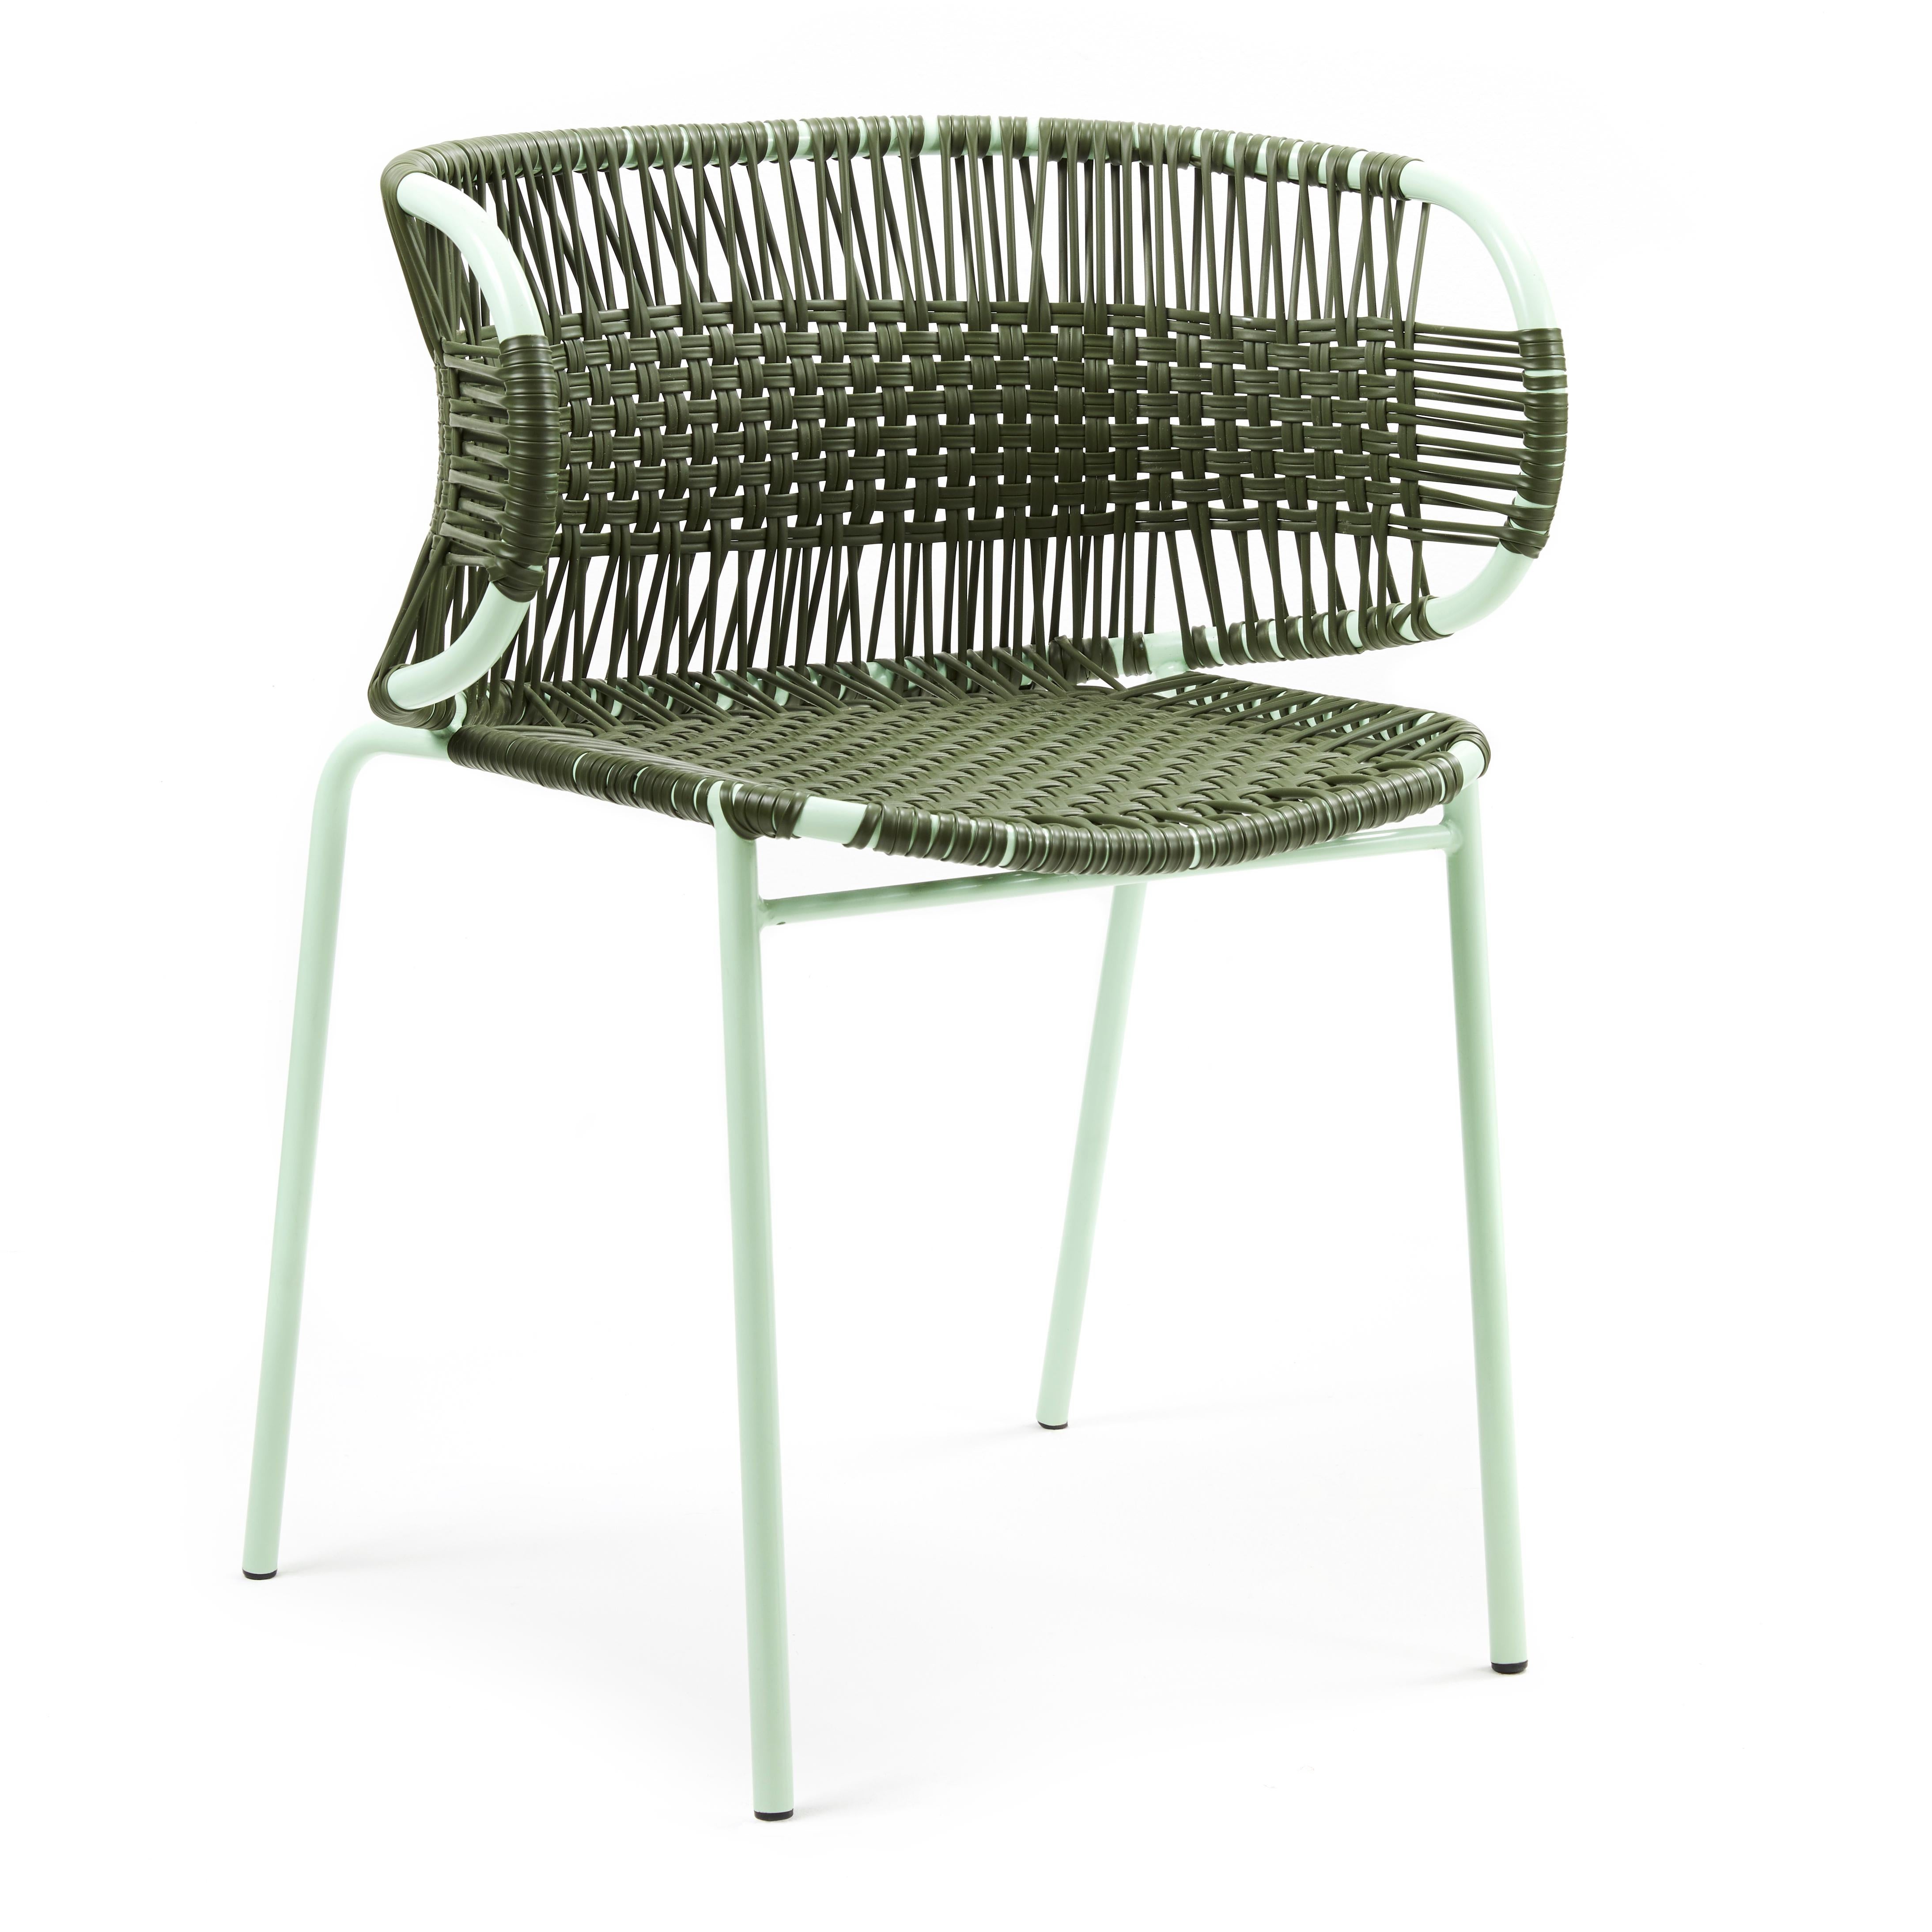 Set of 4 olive Cielo stacking chair with Armrest by Sebastian Herkner.
Materials: galvanized and powder-coated tubular steel. PVC strings are made from recycled plastic.
Technique: made from recycled plastic and weaved by local craftspeople in